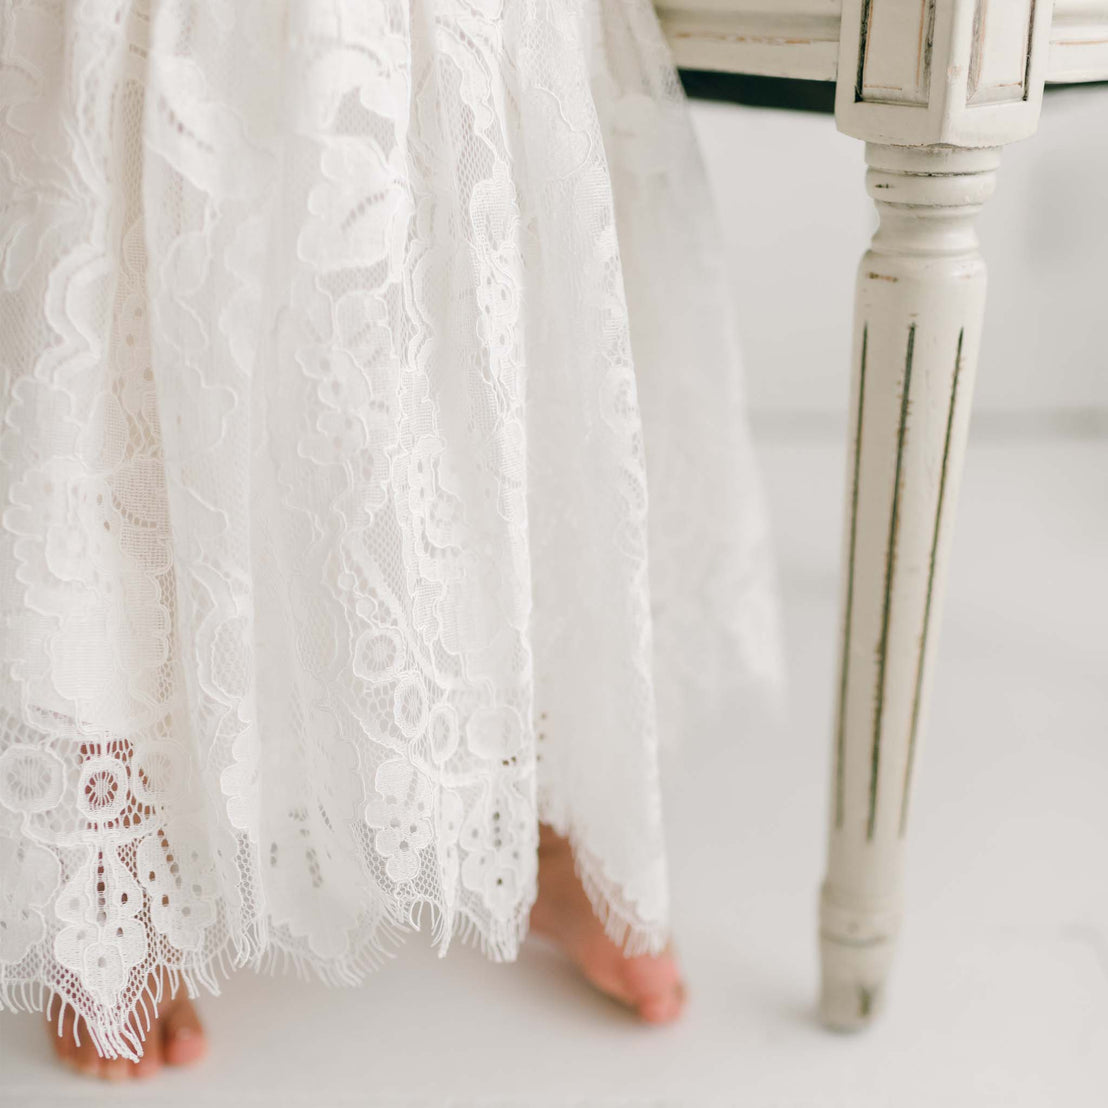 A close-up image of a person's bare feet peeking from under a delicate white Victoria Puff Sleeve Christening Dress, next to a vintage white wooden chair. The focus is on the intricate embroidered lace pattern and the texture of the chair.